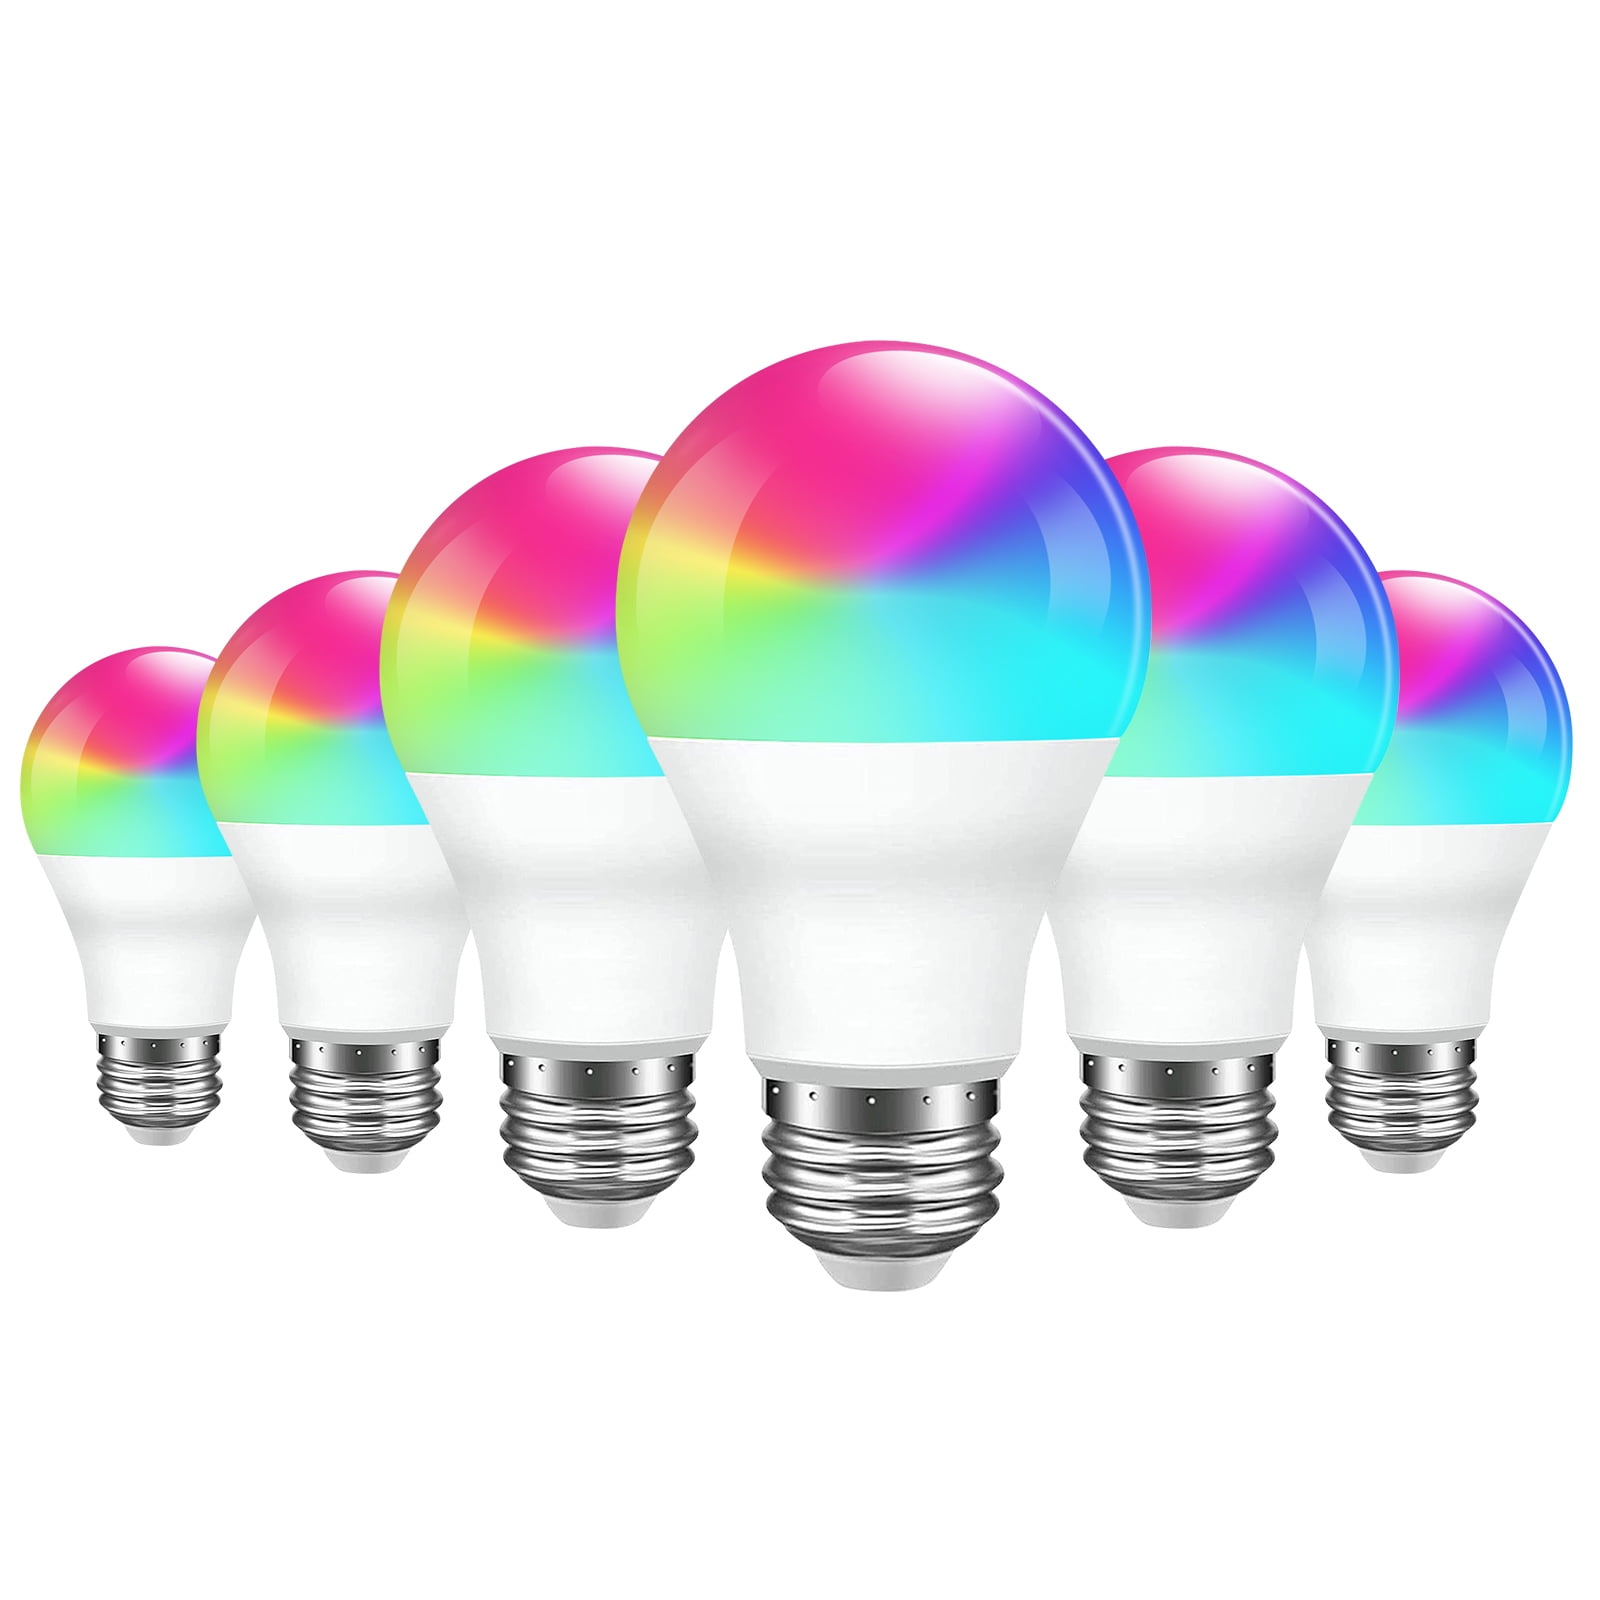 skyld dommer som resultat PHOPOLLO LED Light Bulbs, RGBW Wi-Fi Color Changing Led Bulbs Compatible  with Alexa and Google Home Assistant, A19 E26 9W 800LM Multicolor Led Light  Bulb, 6 Pack - Walmart.com